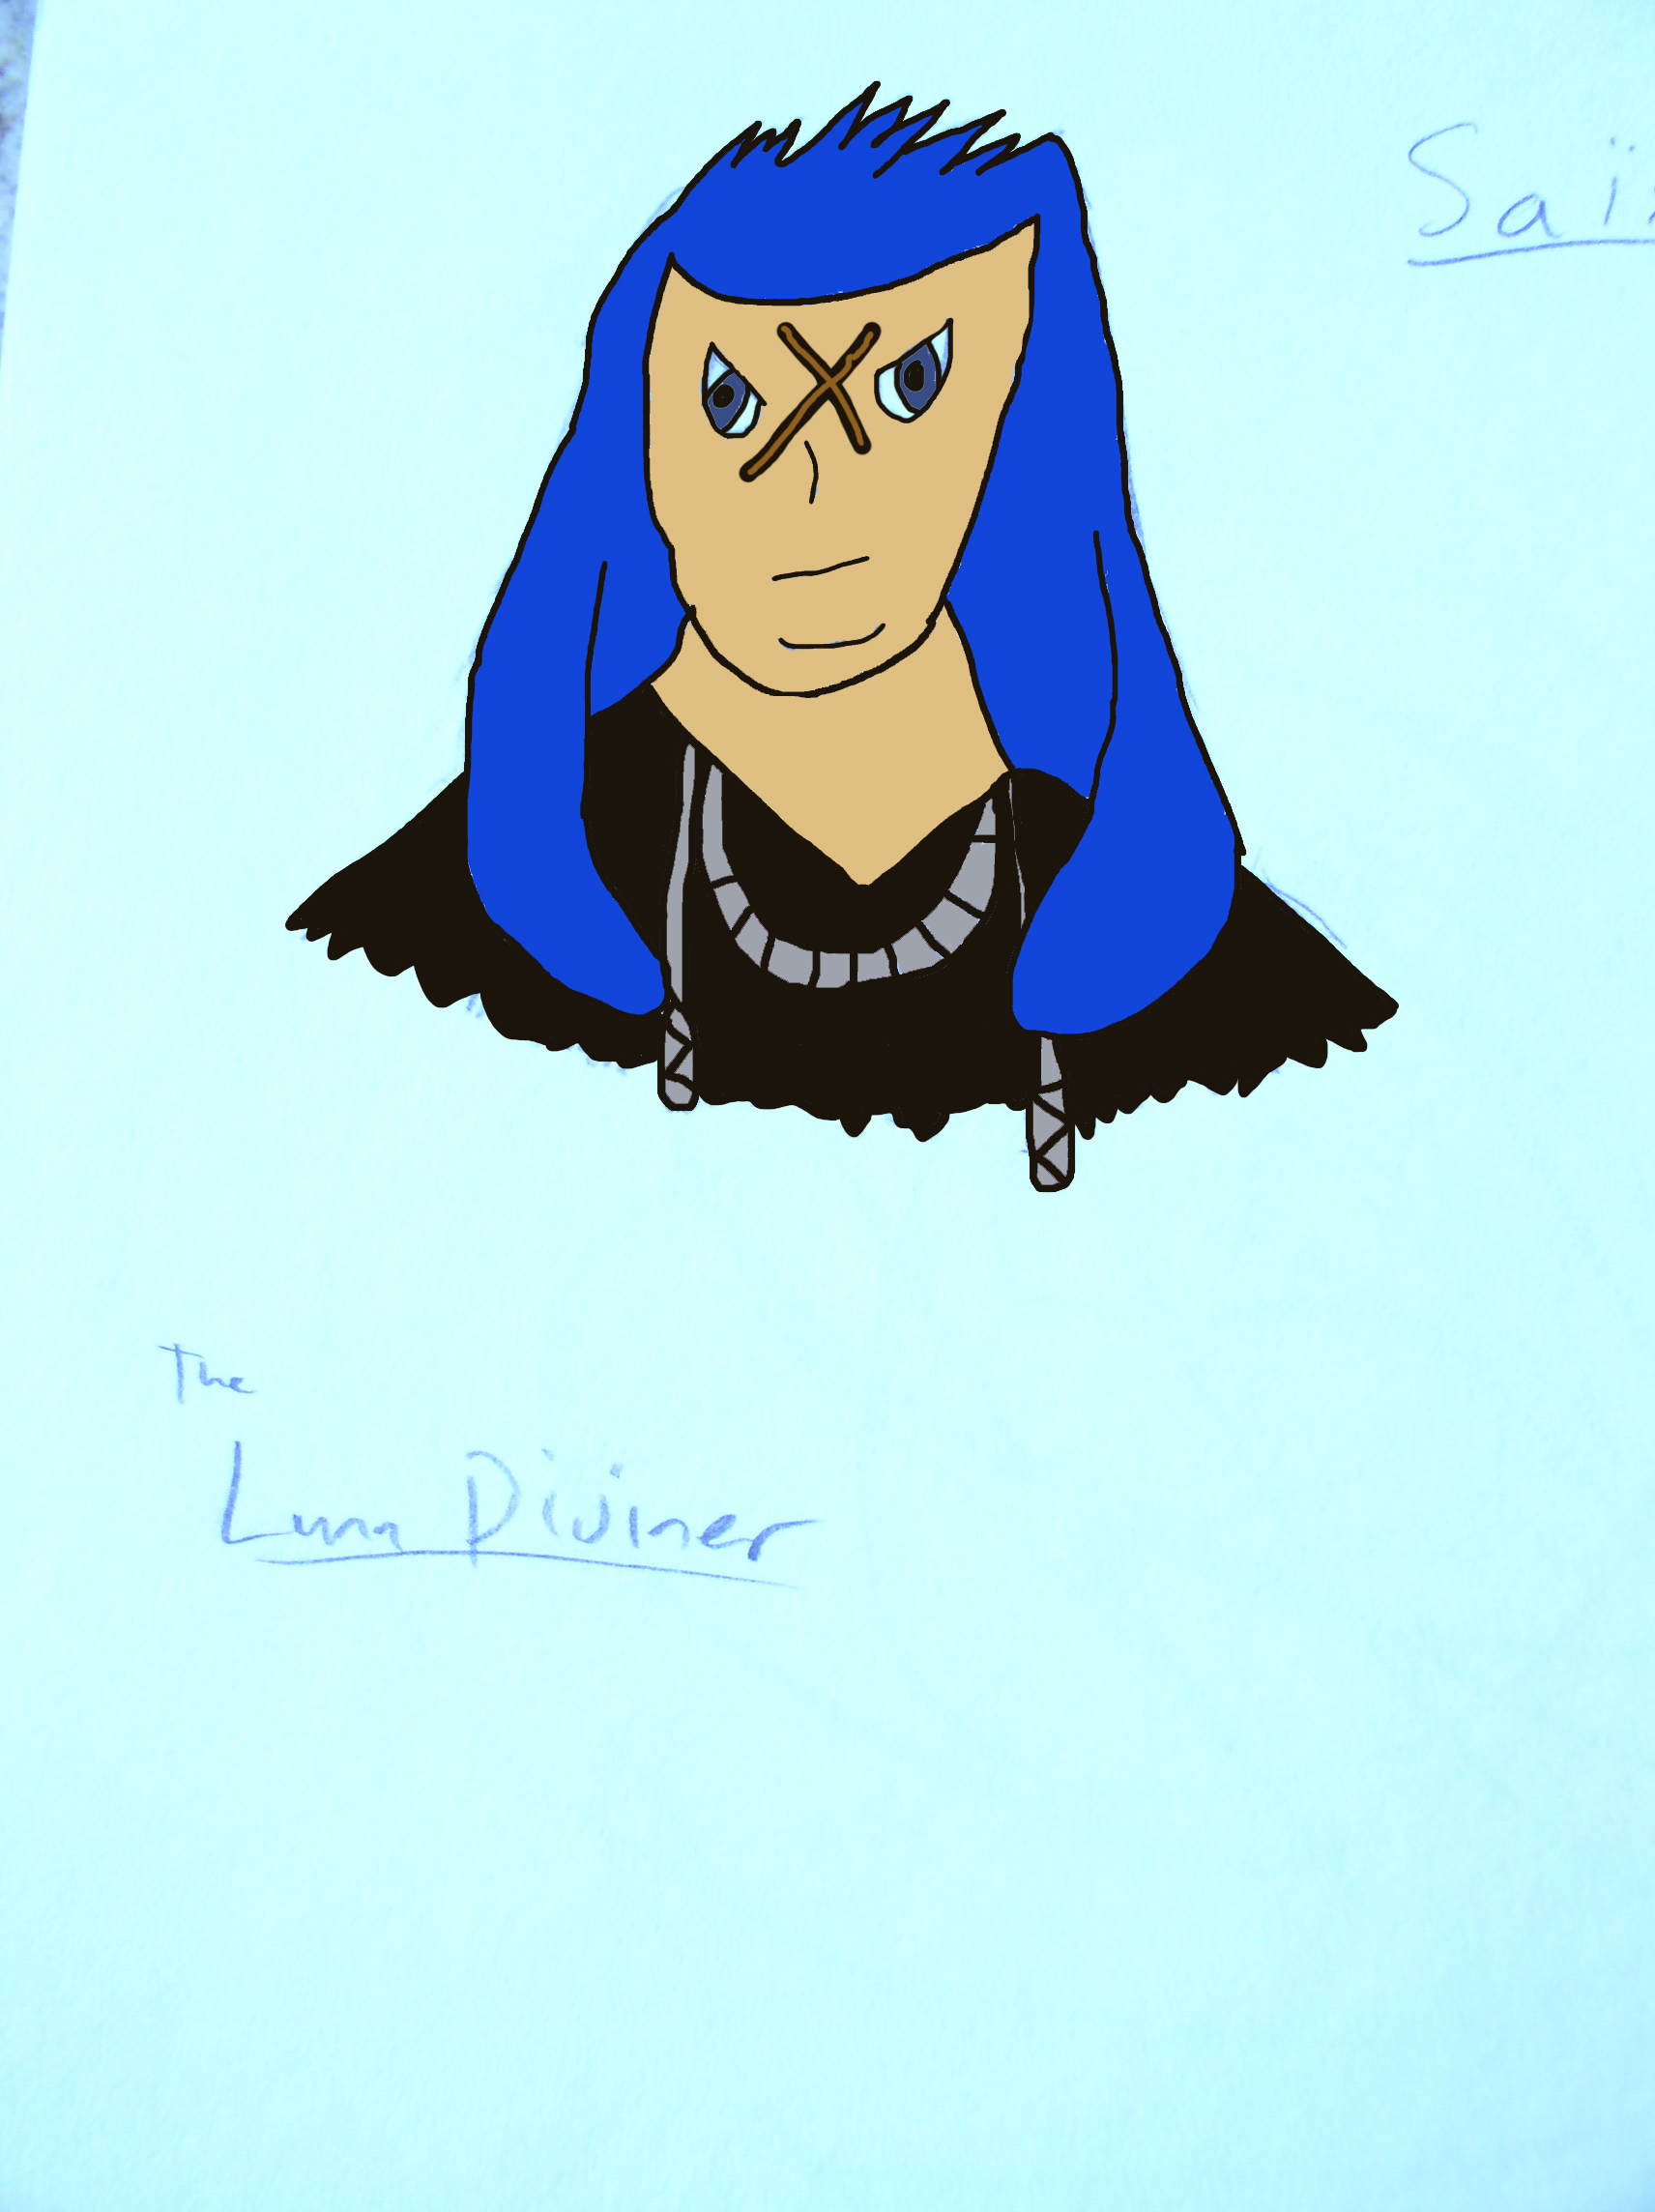 The Luna Diviner (recolored) by CaptiainIndianaSolo